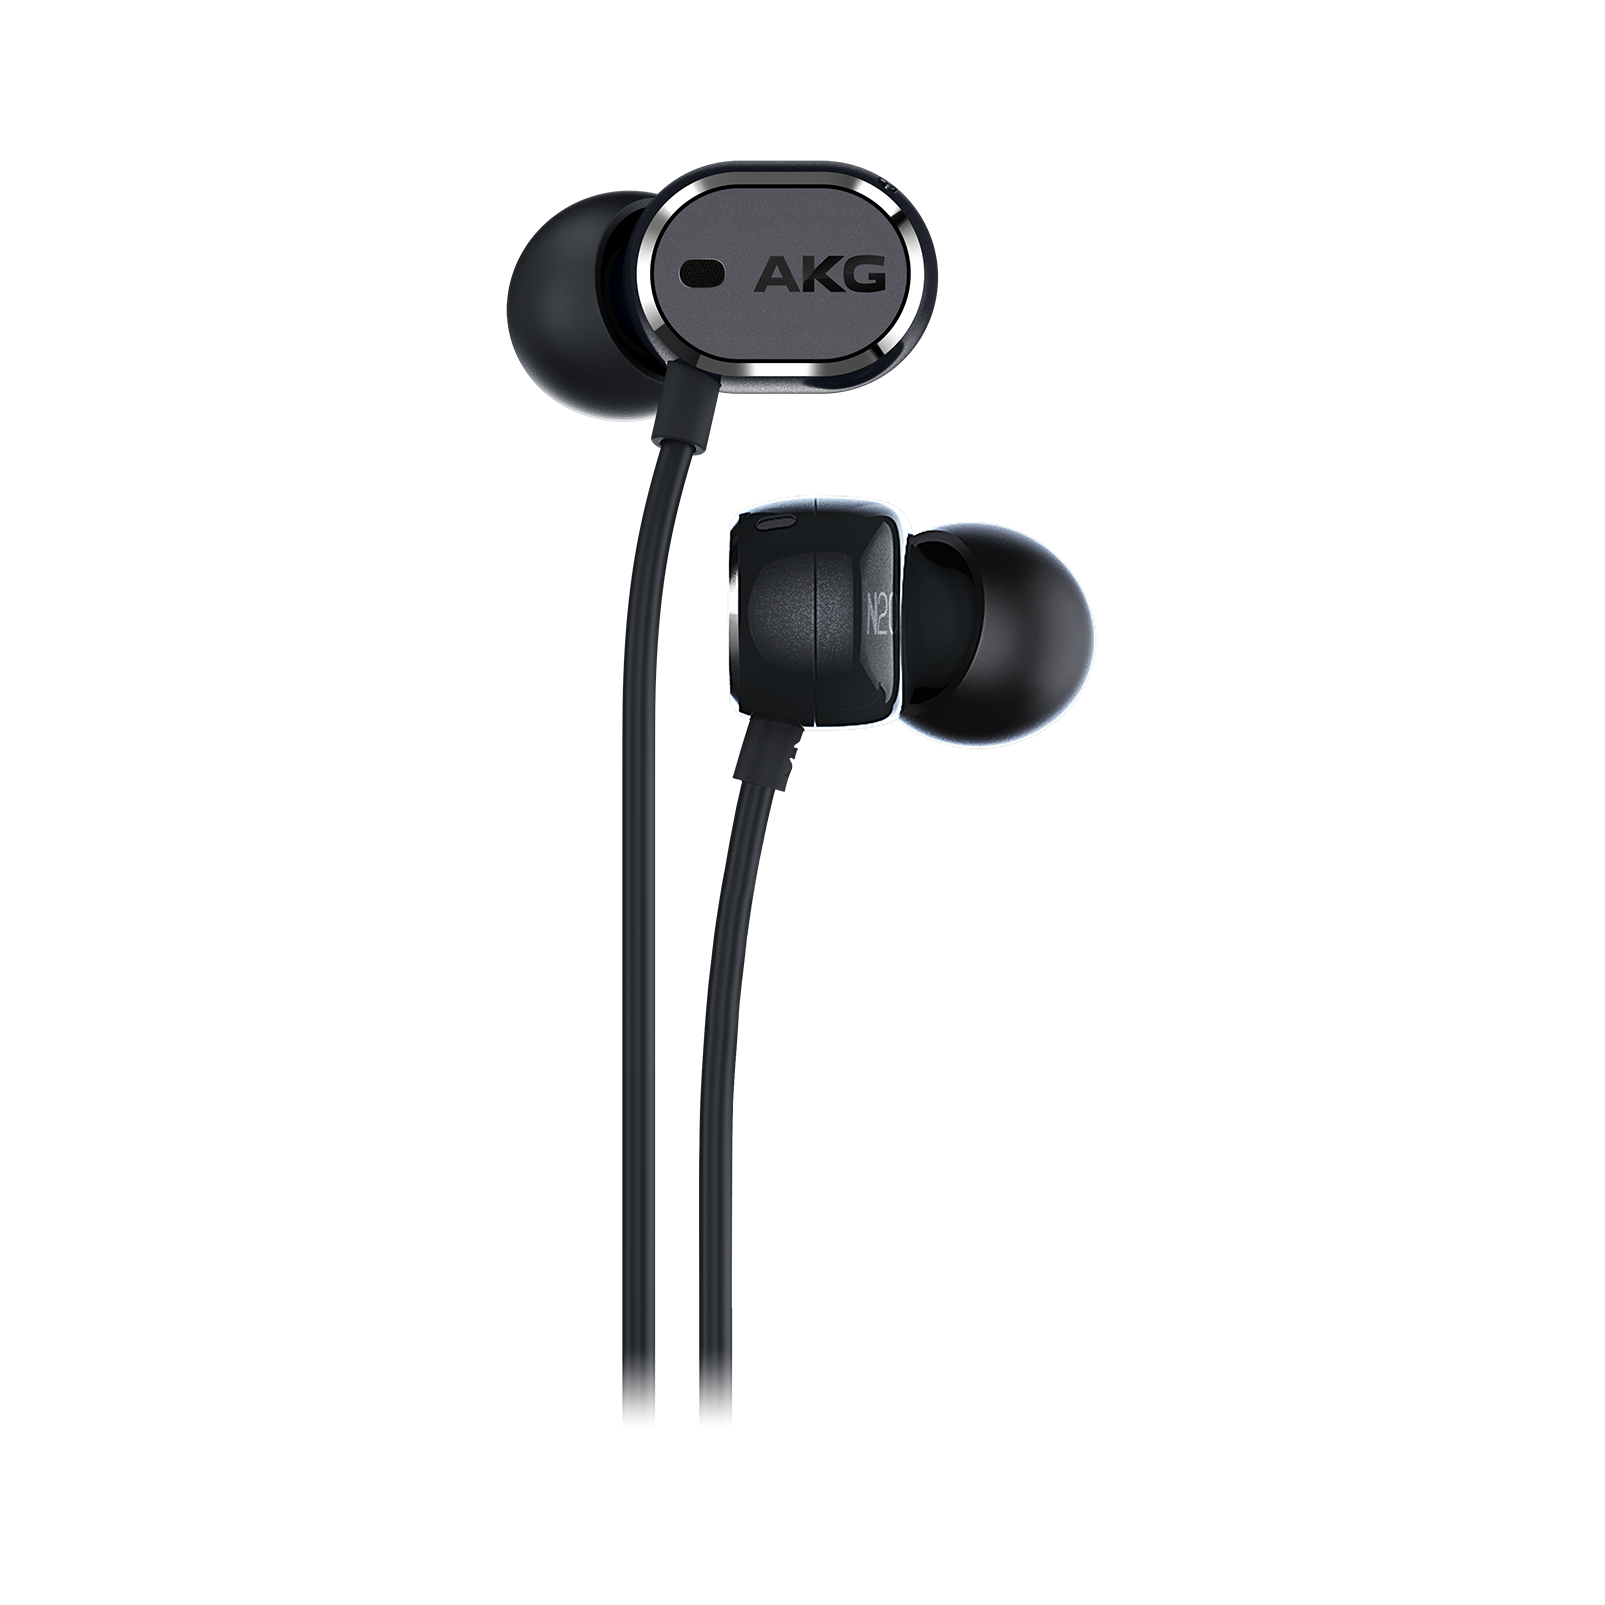 N20 NC - Black - In-ear headphones with active noise cancelling - Detailshot 1